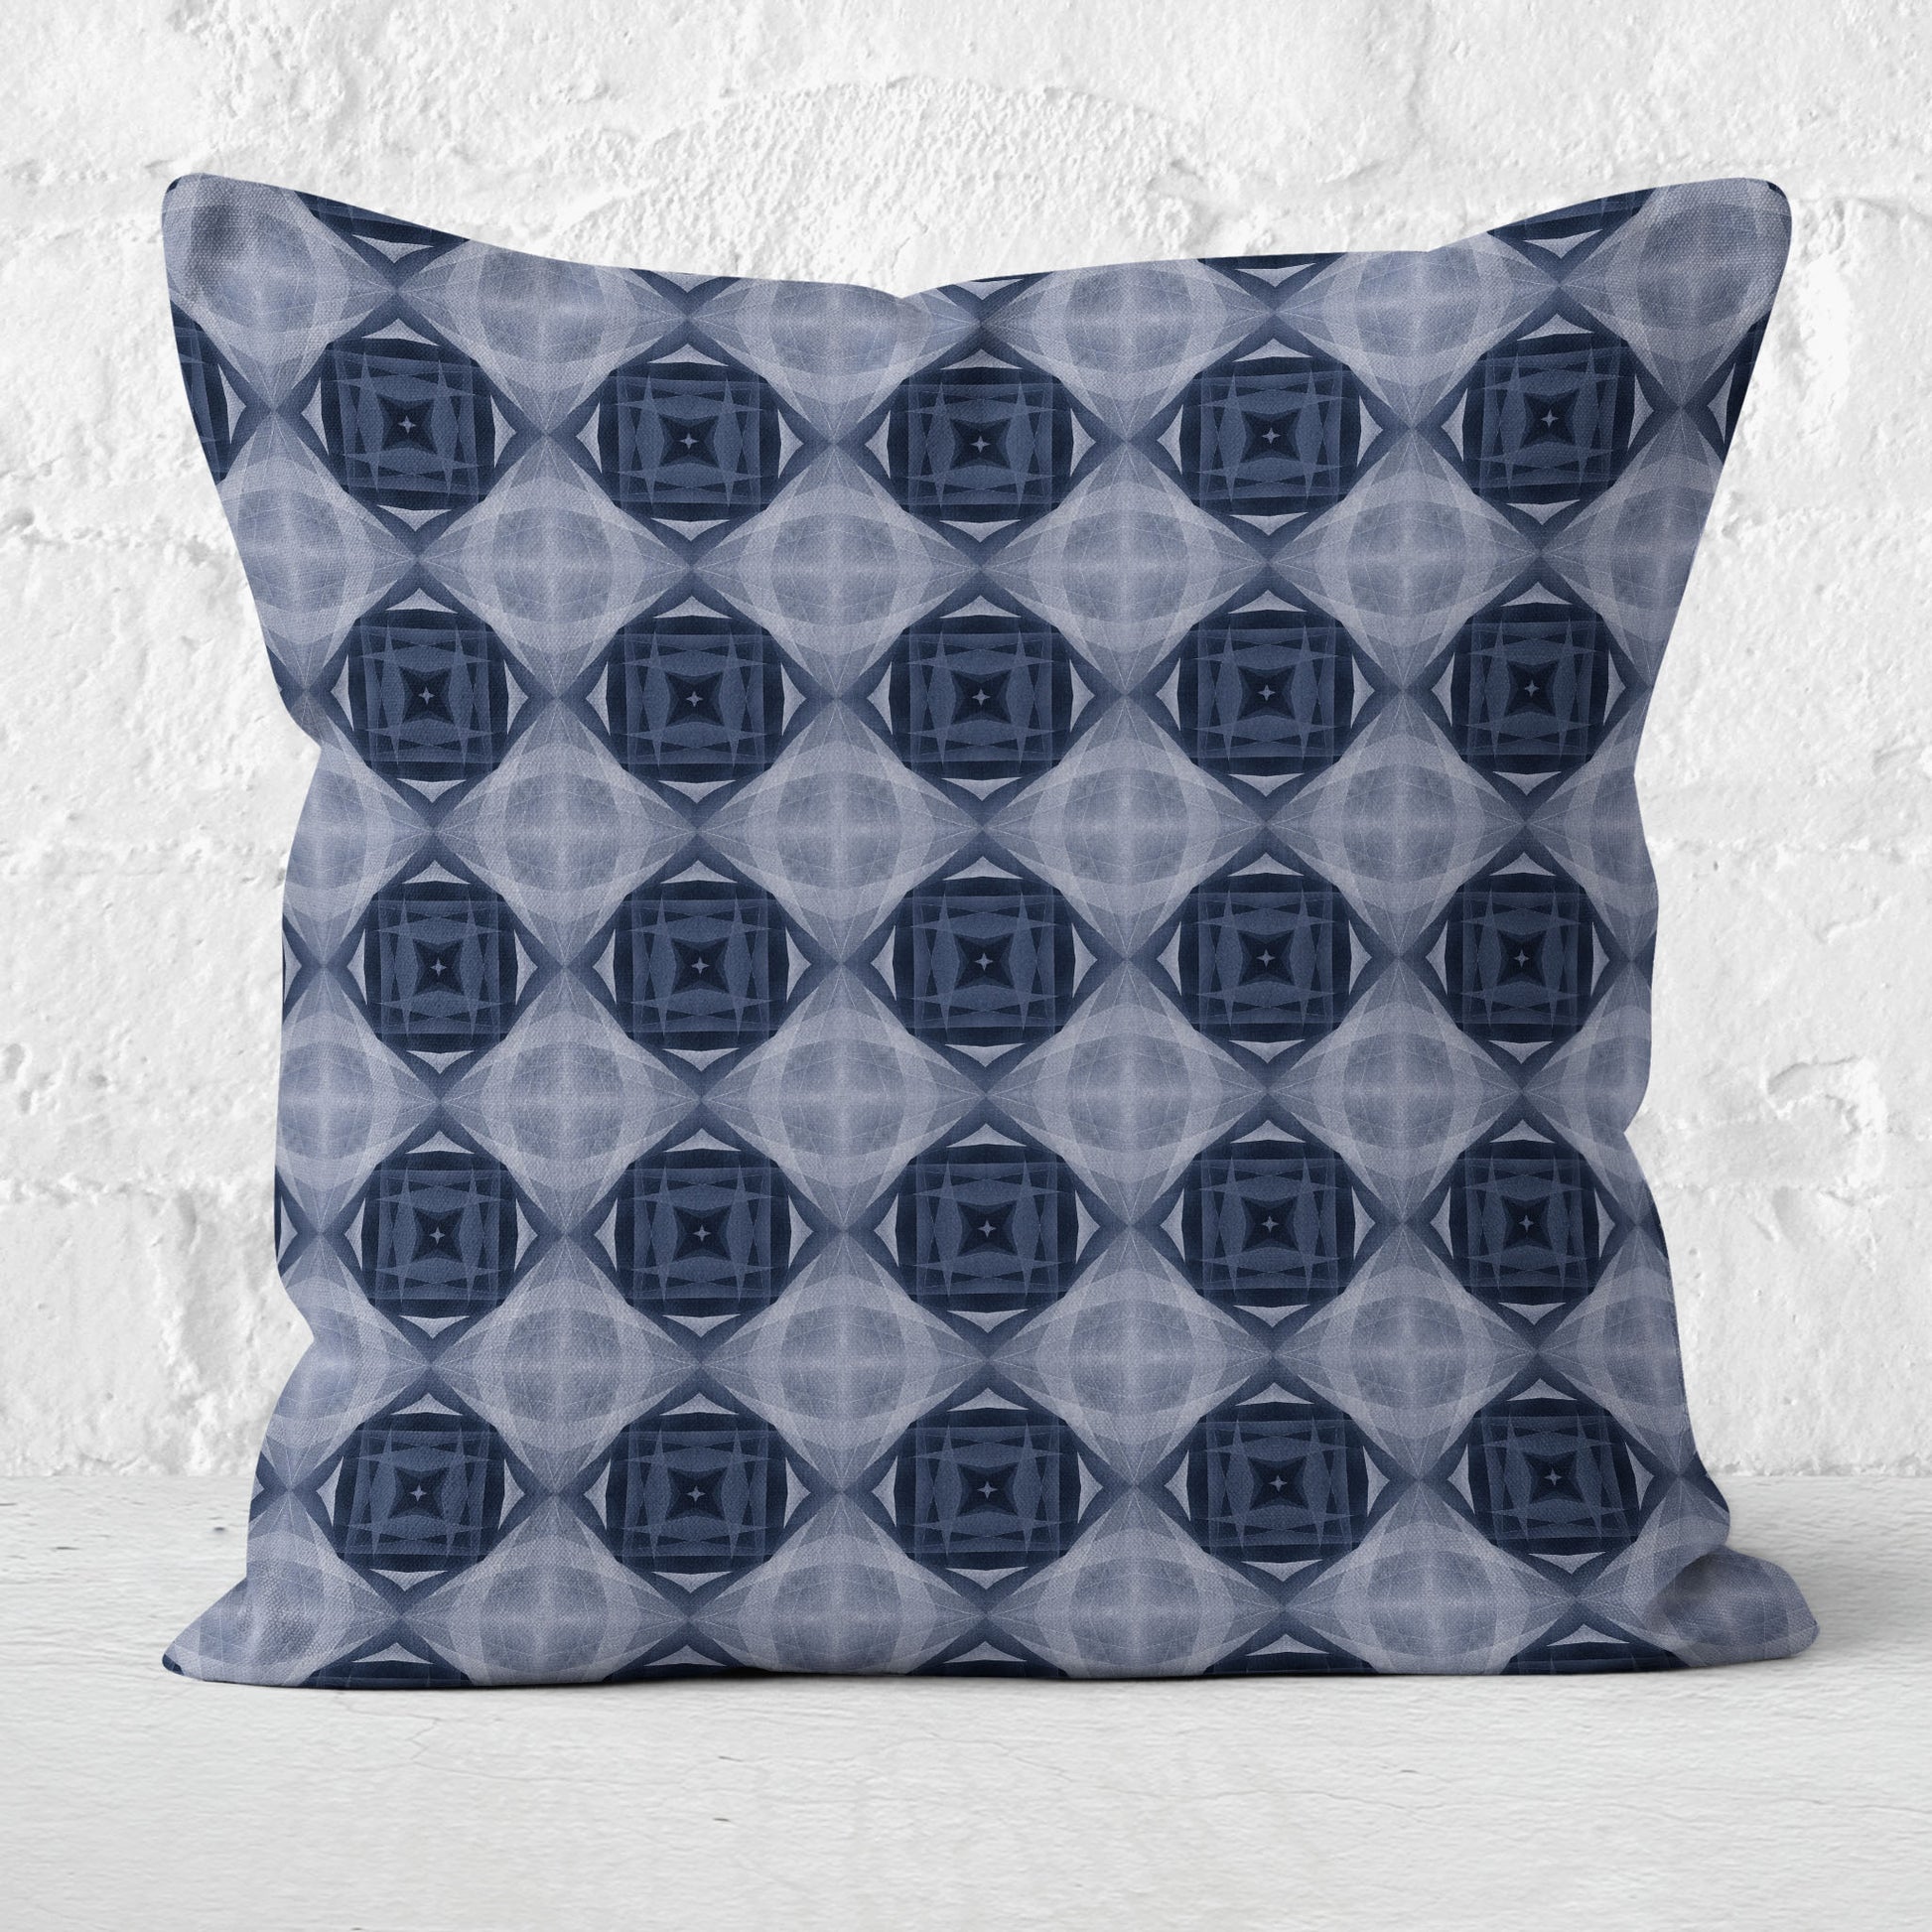 Pillow featuring a blue collage pattern on a white brick background